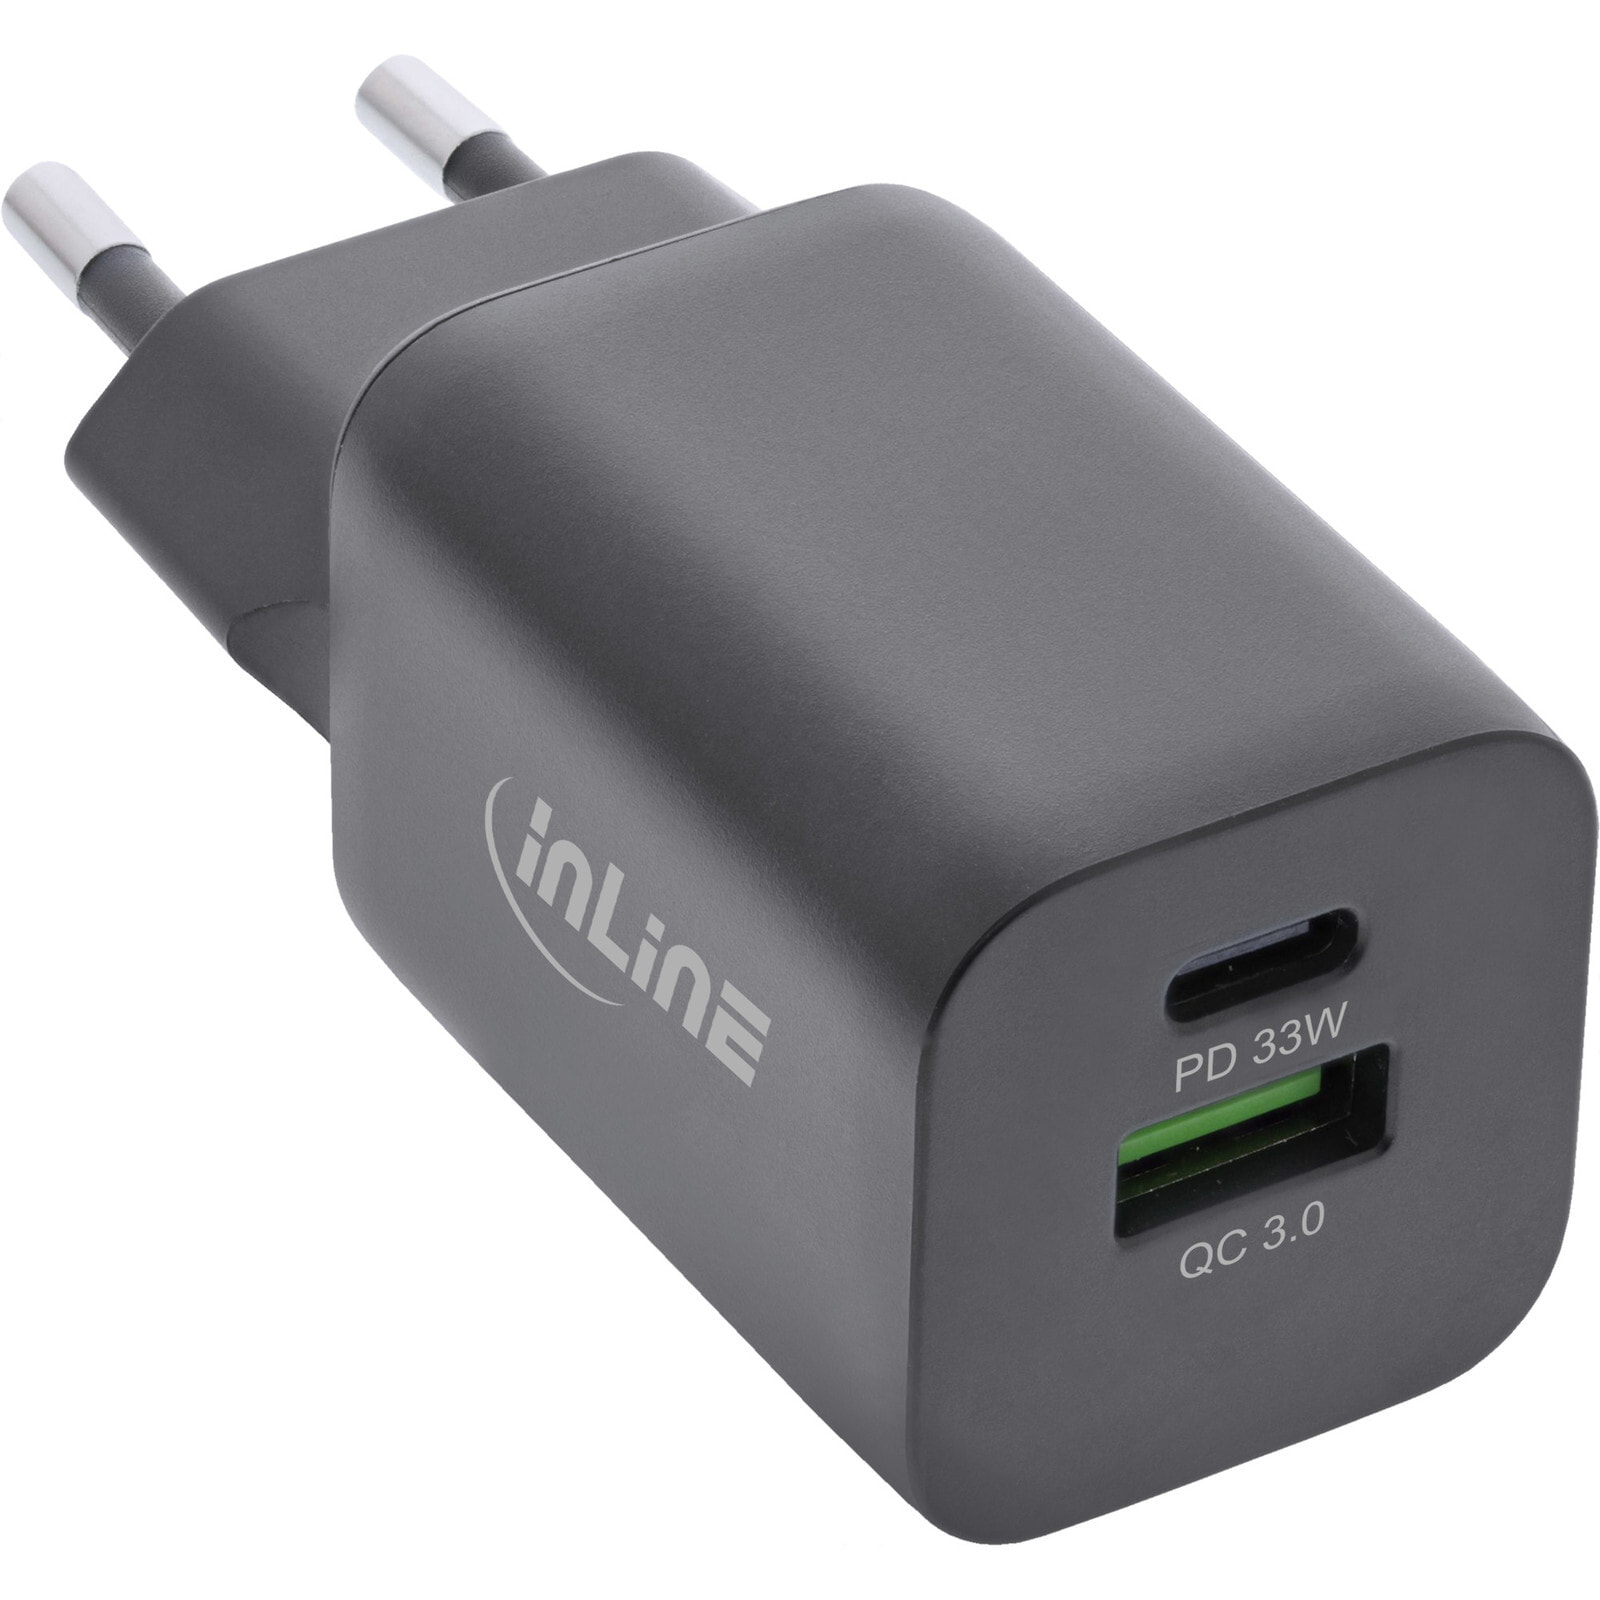 USB power supply - charger - USB-A + USB Type-C - 33W - PD + QC